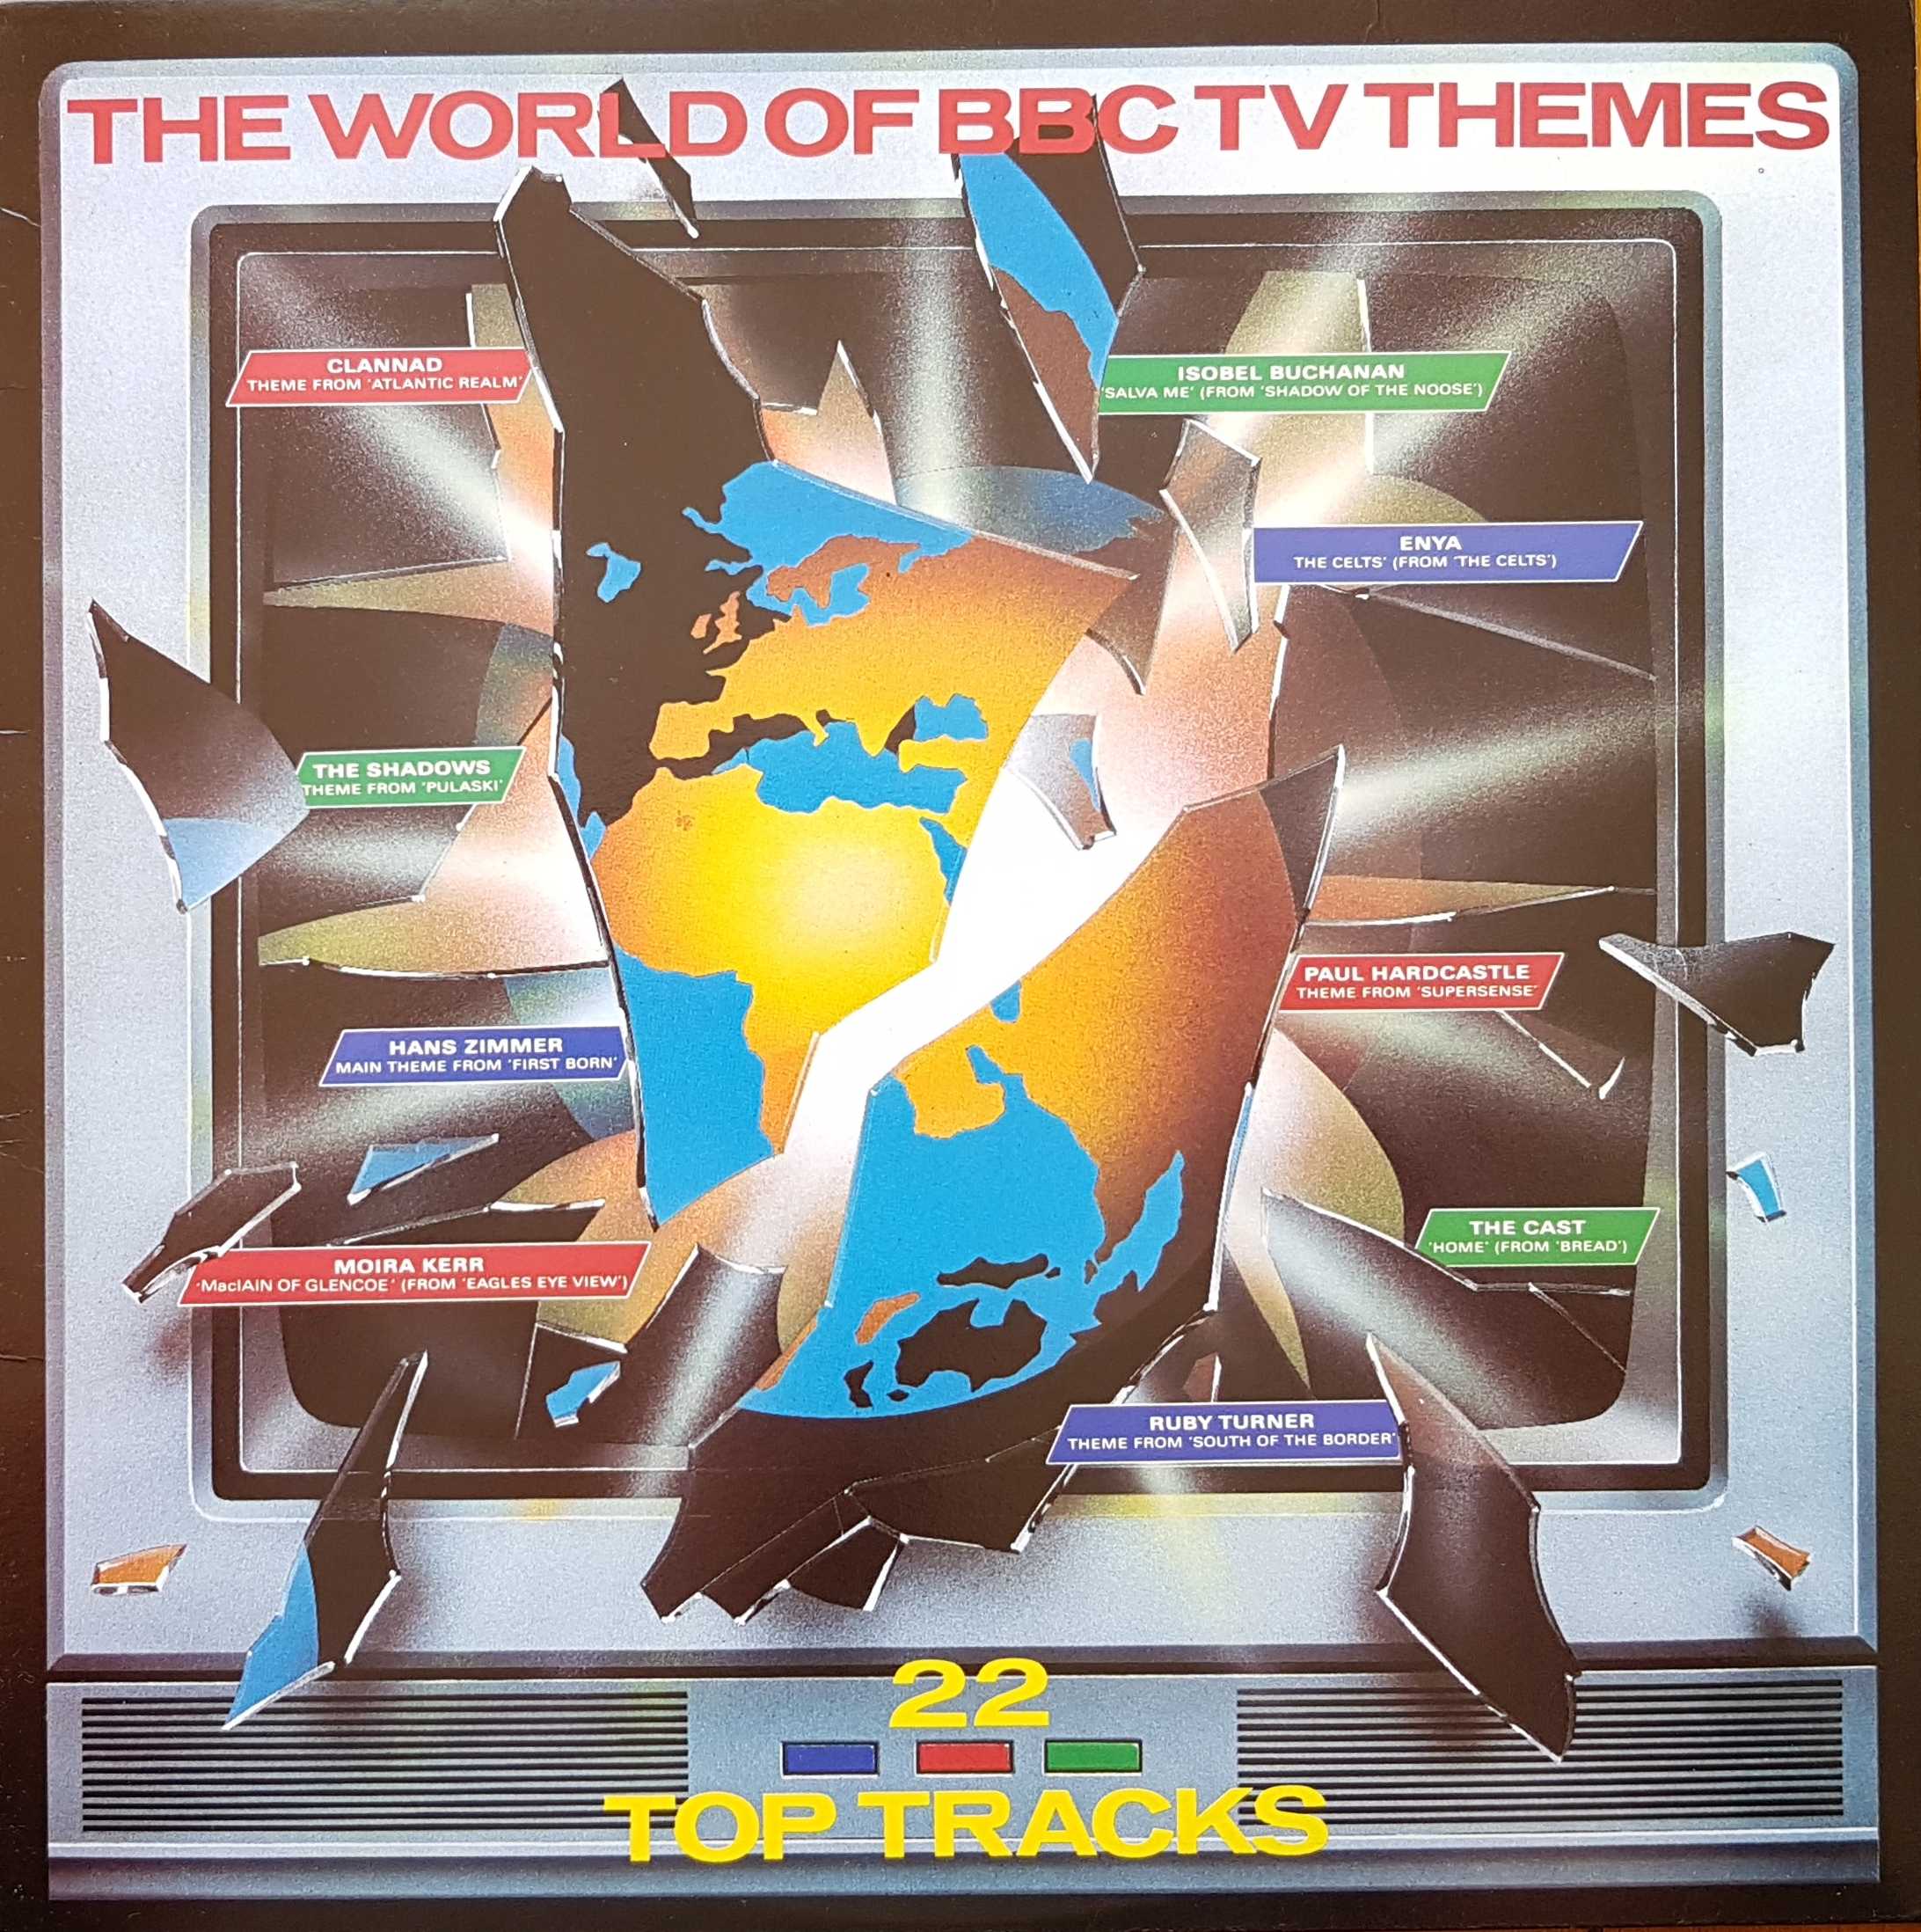 Picture of REB 705 The World of BBC TV themes by artist Various from the BBC albums - Records and Tapes library